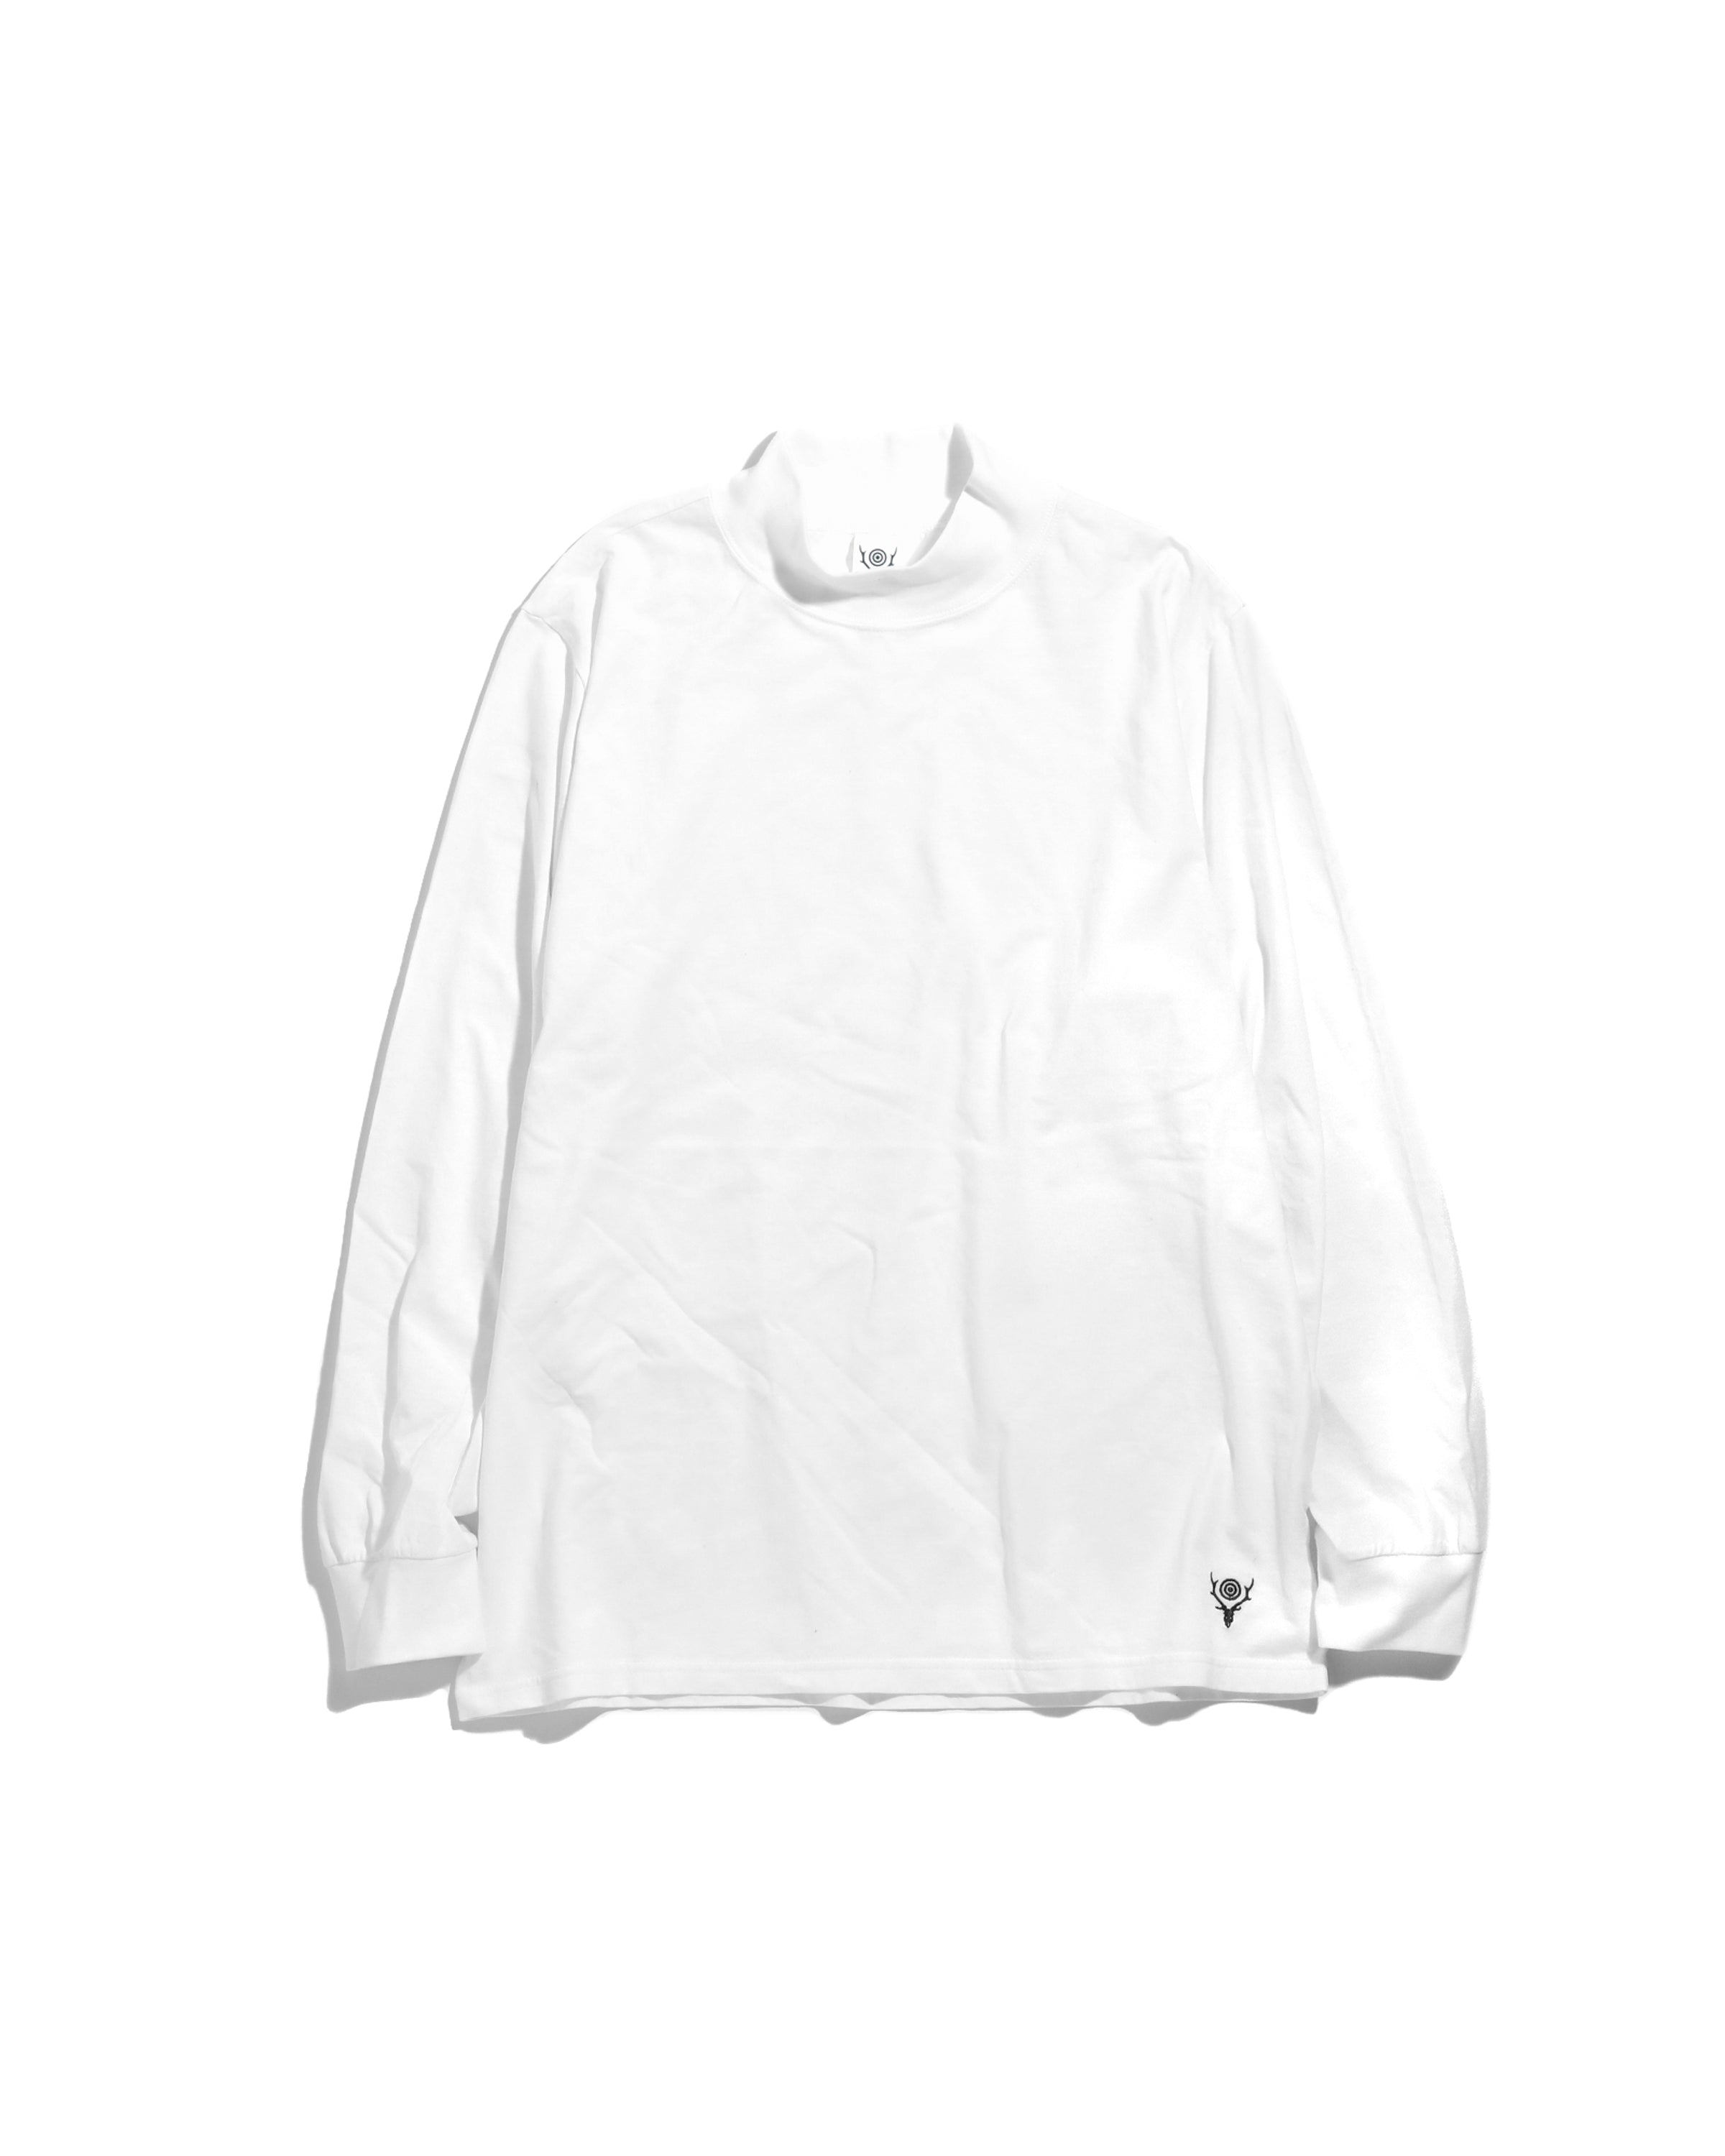 L/S Mock Neck Tee - Cordura Jersey - White | Nepenthes New York